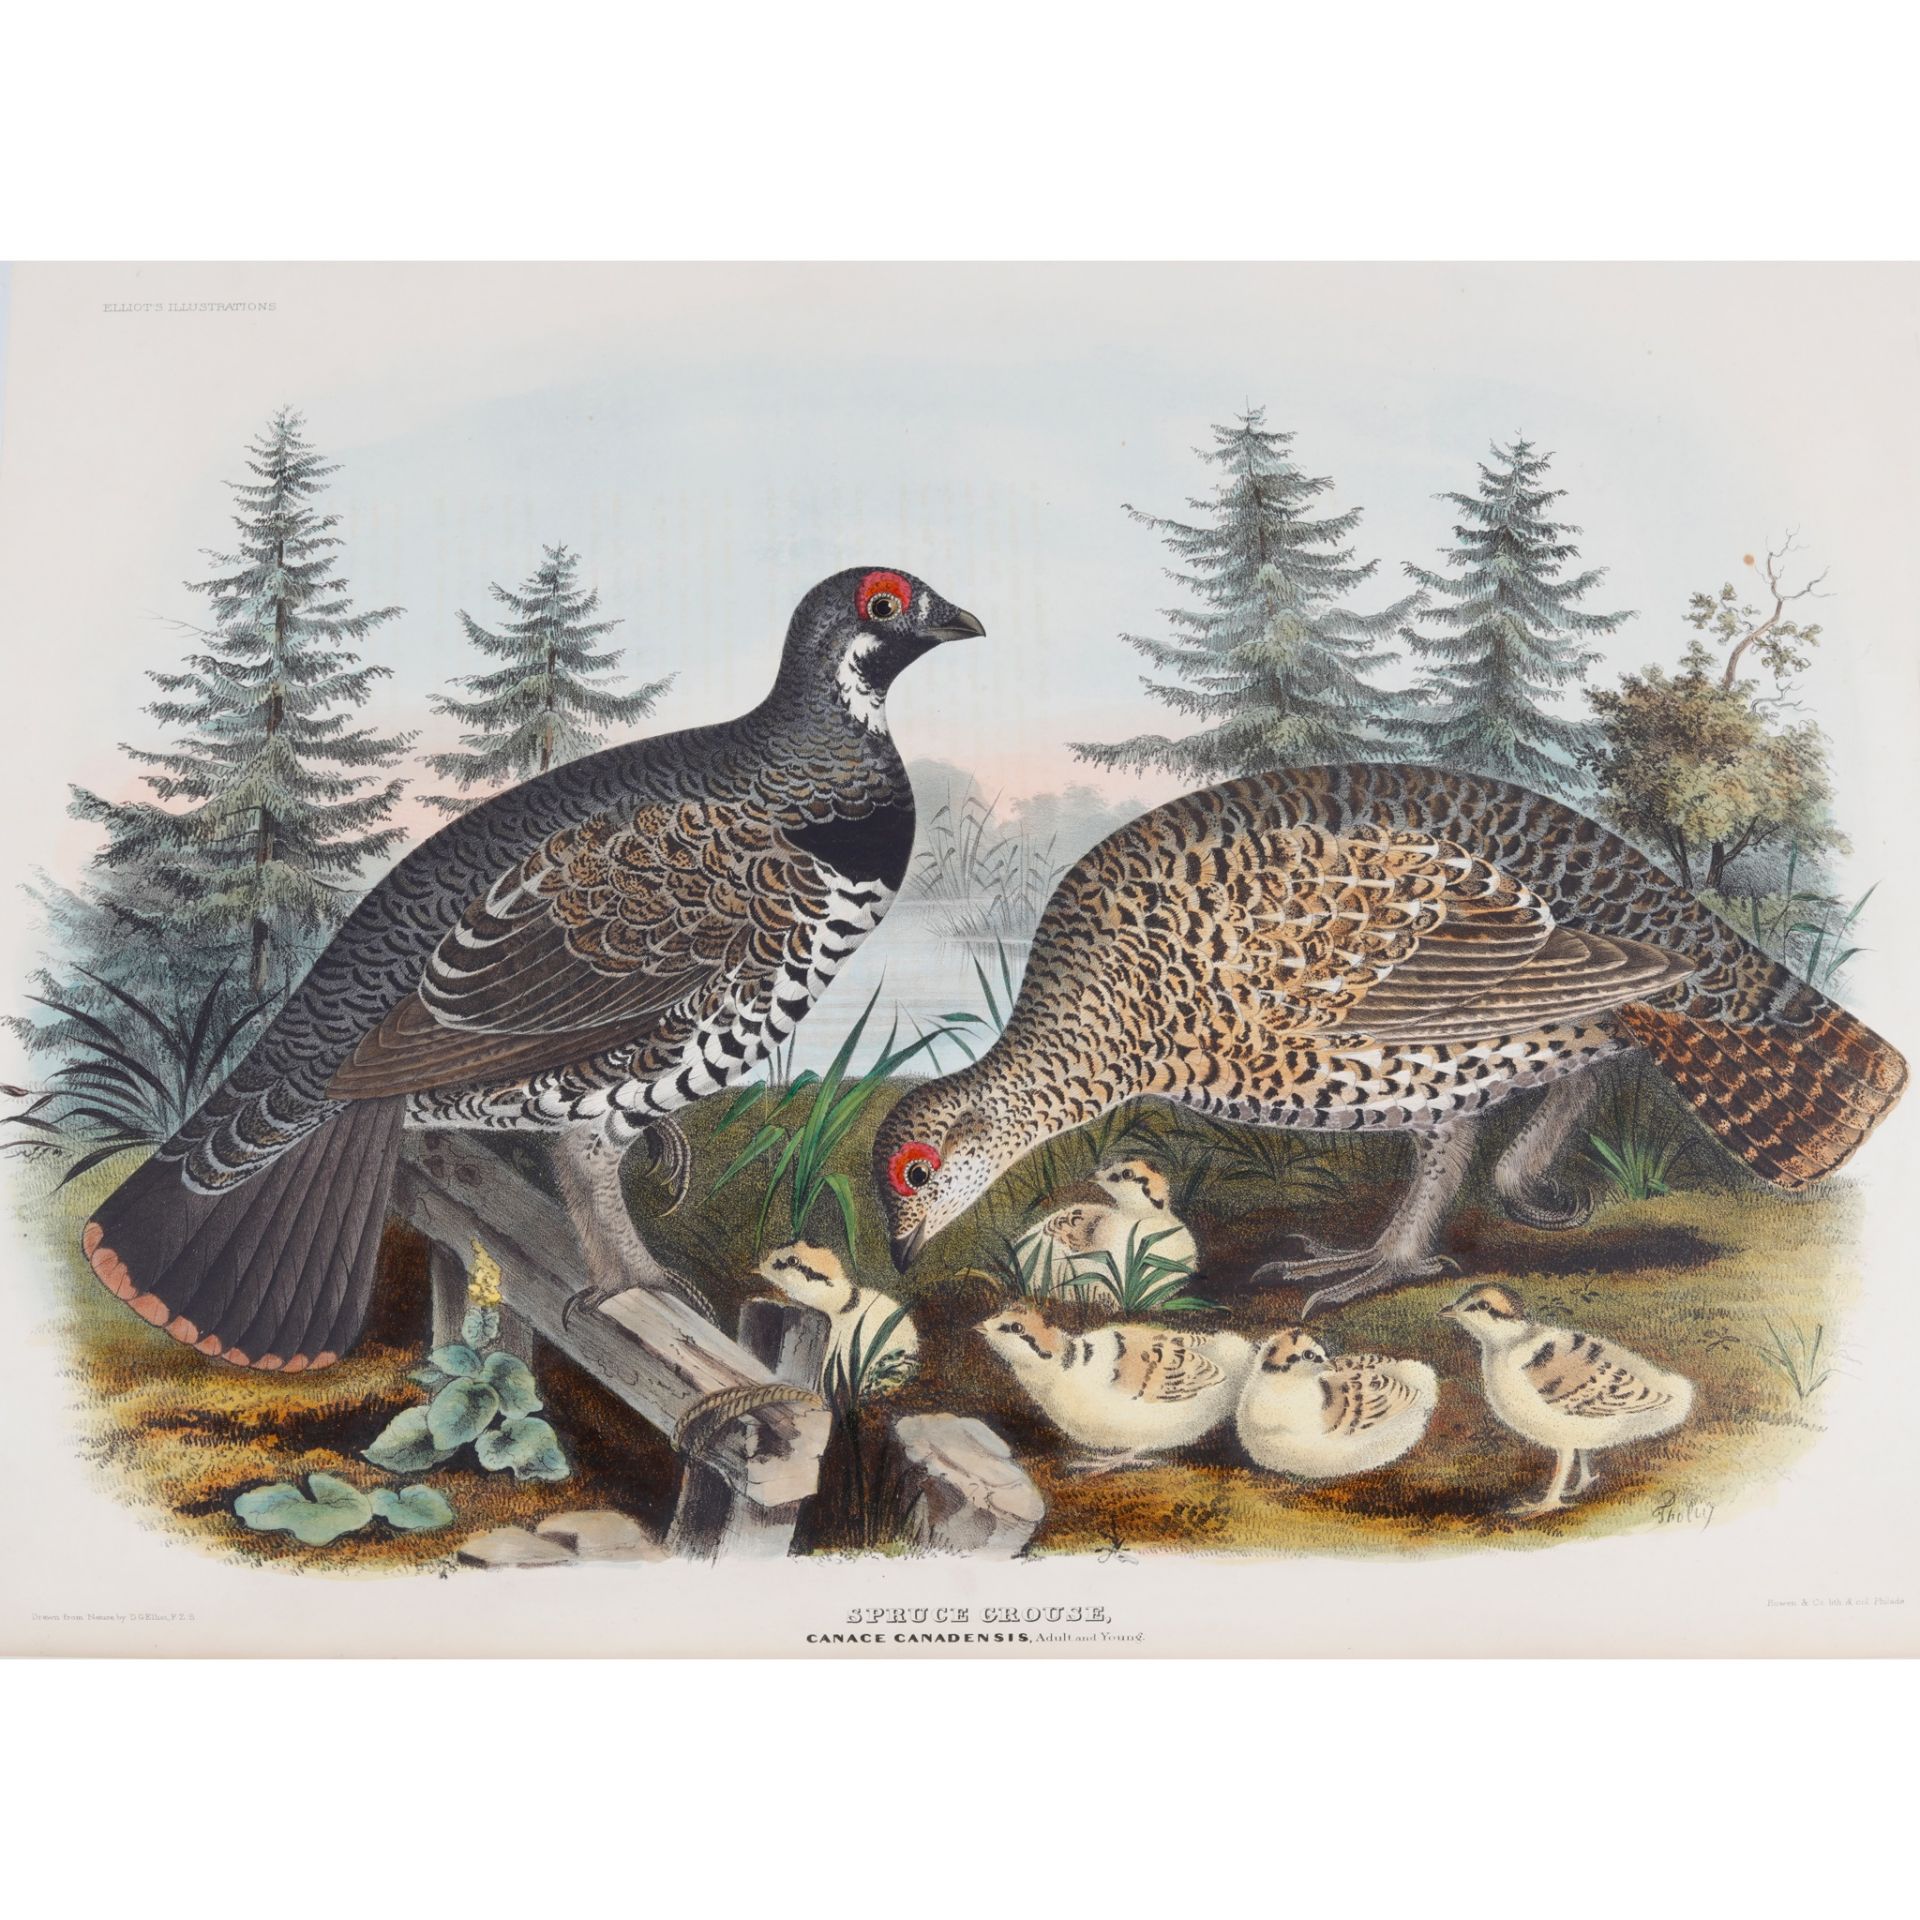 Elliot, Daniel Giraud A Monograph of the Tetraoninae, or Family of the Grouse